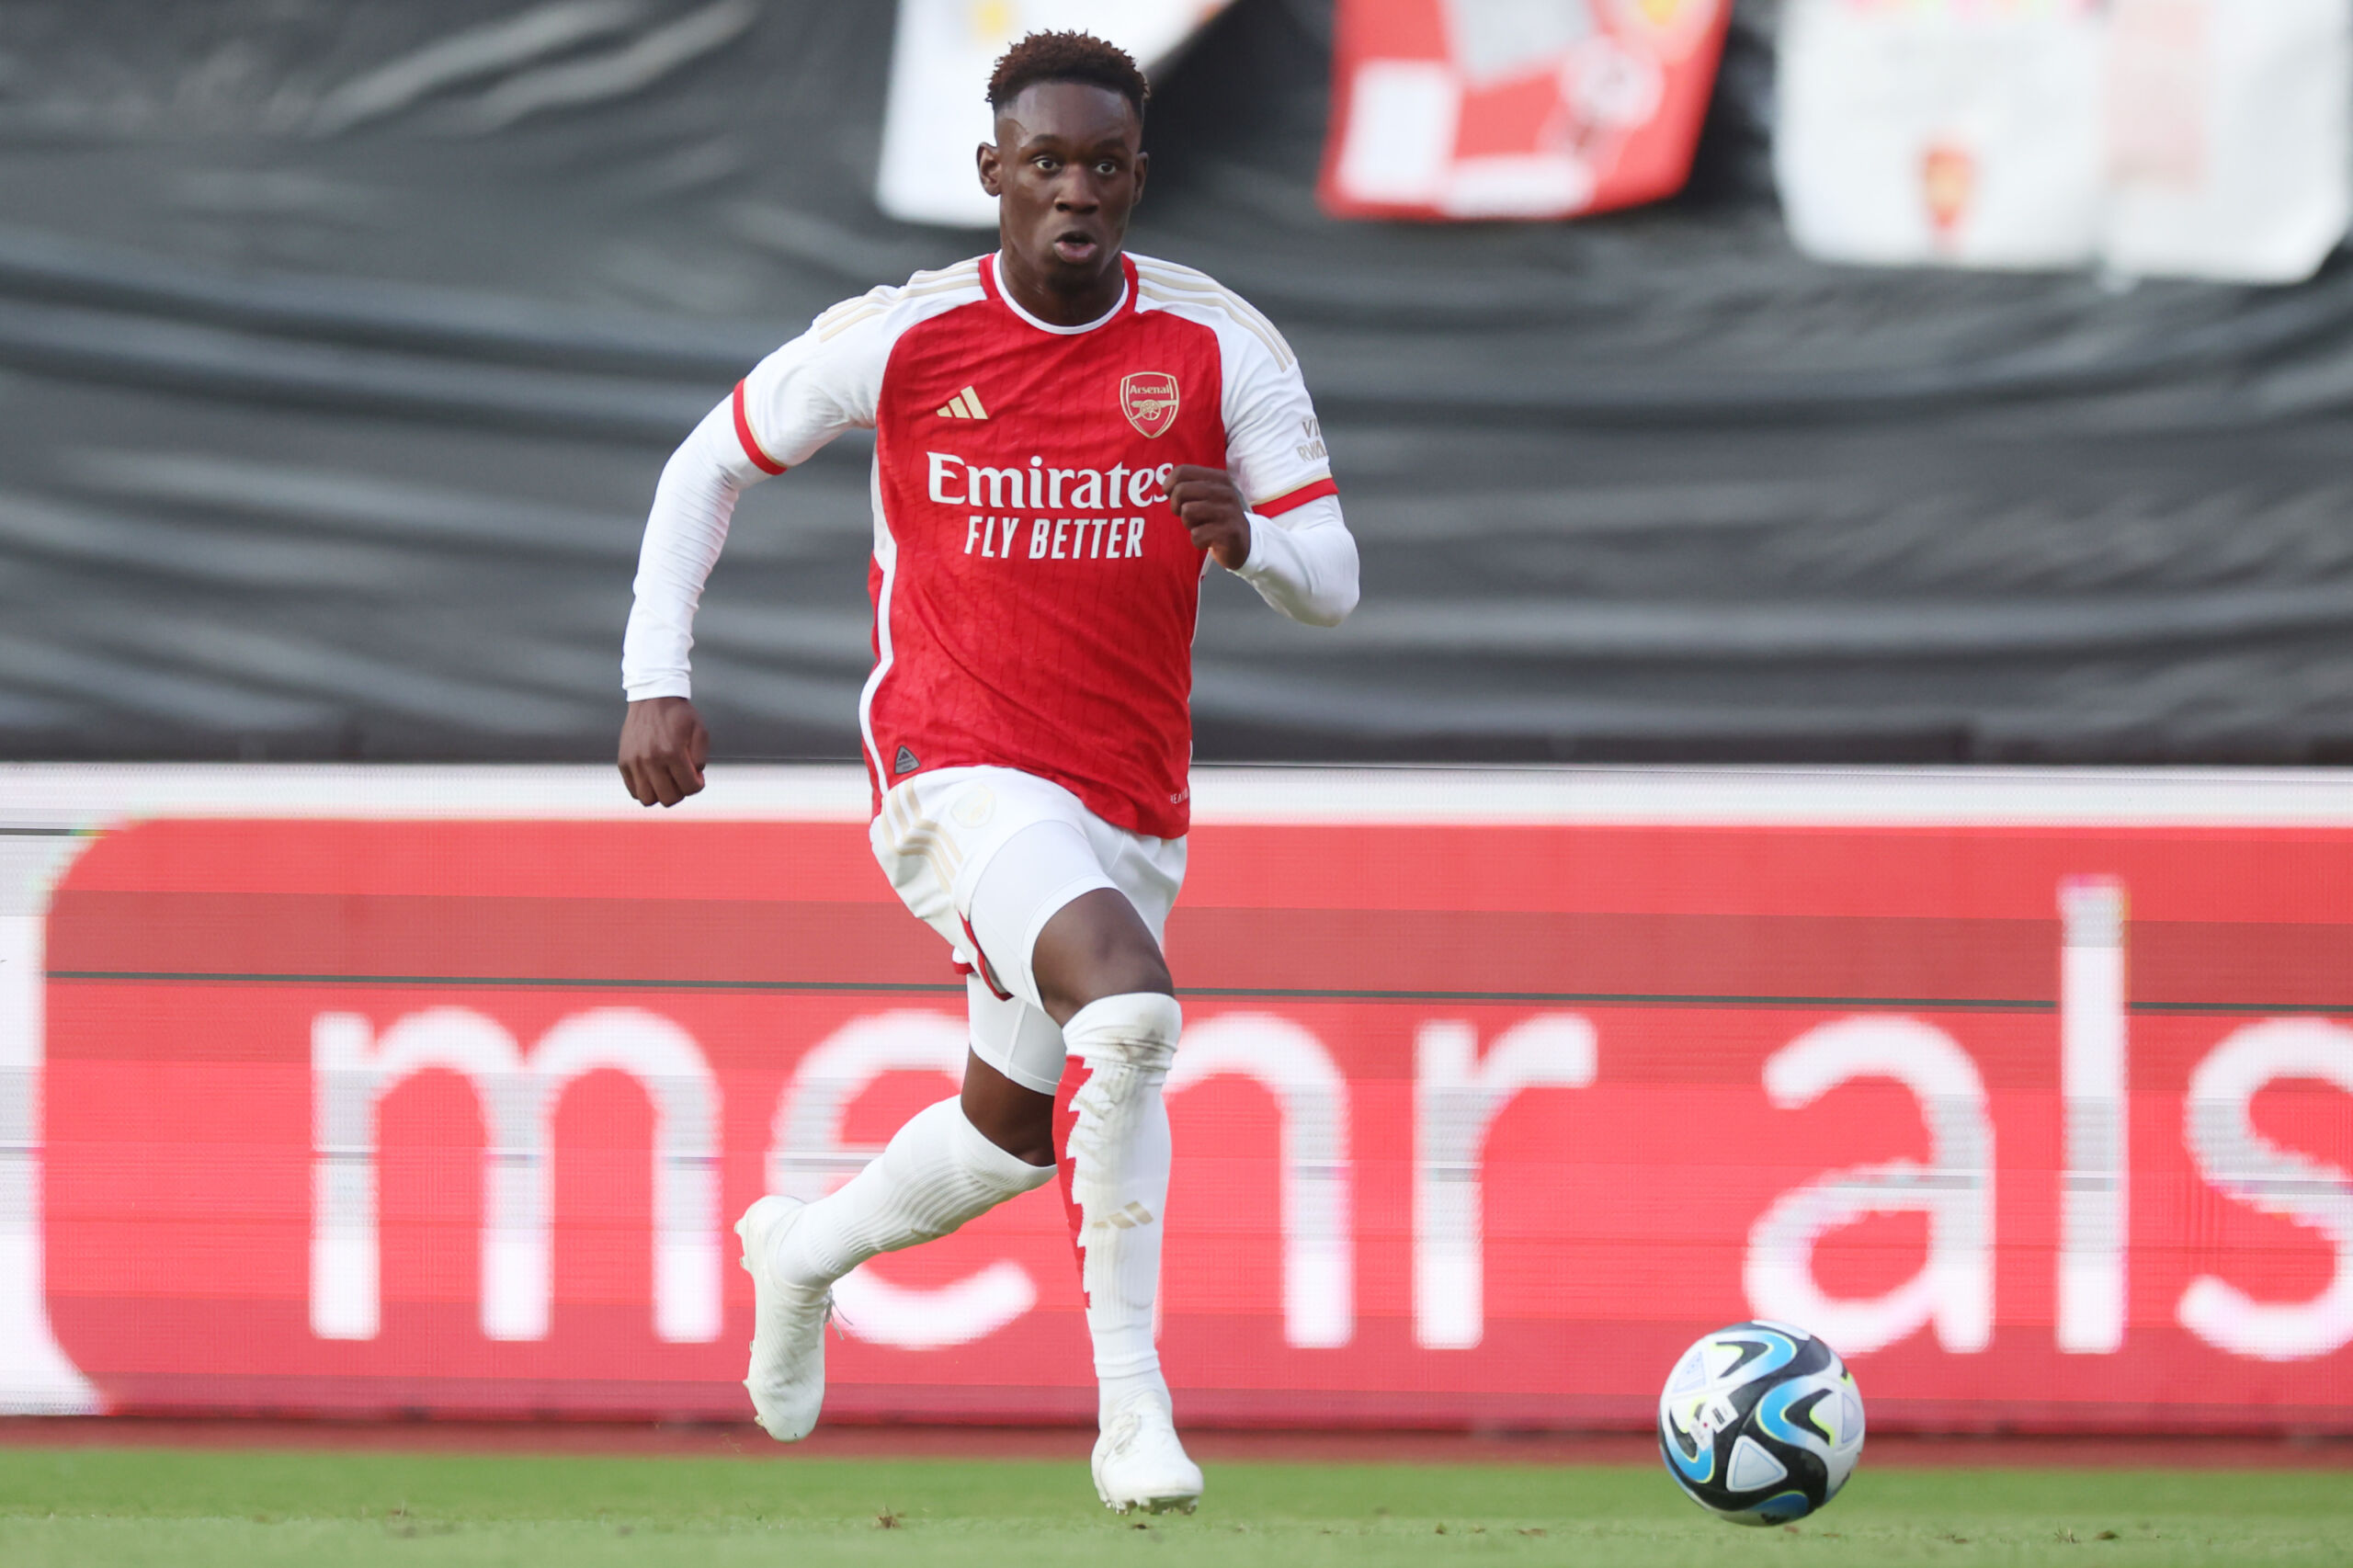 Are Arsenal making a Mistake by Selling Folarin Balogun?